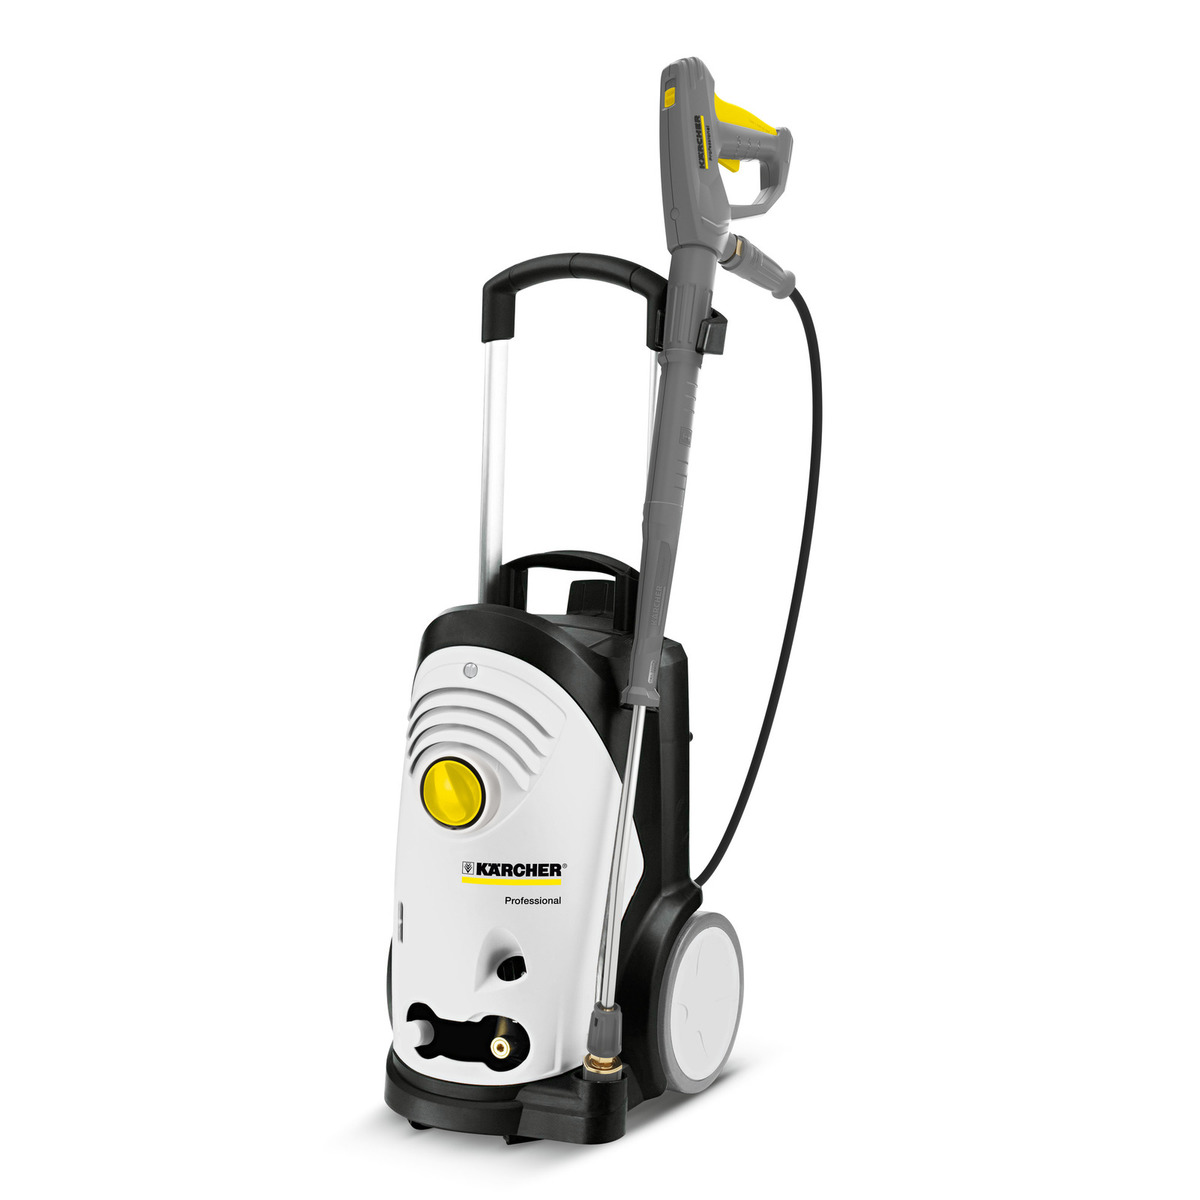 *DEMO* Karcher HD 2.3/14 C ED FOOD  karcher, HD, 2.3/14 C, ED, Food, cold-water, electric, cold, water, pressure, washer, commercial, professional, powerful, food safe, 